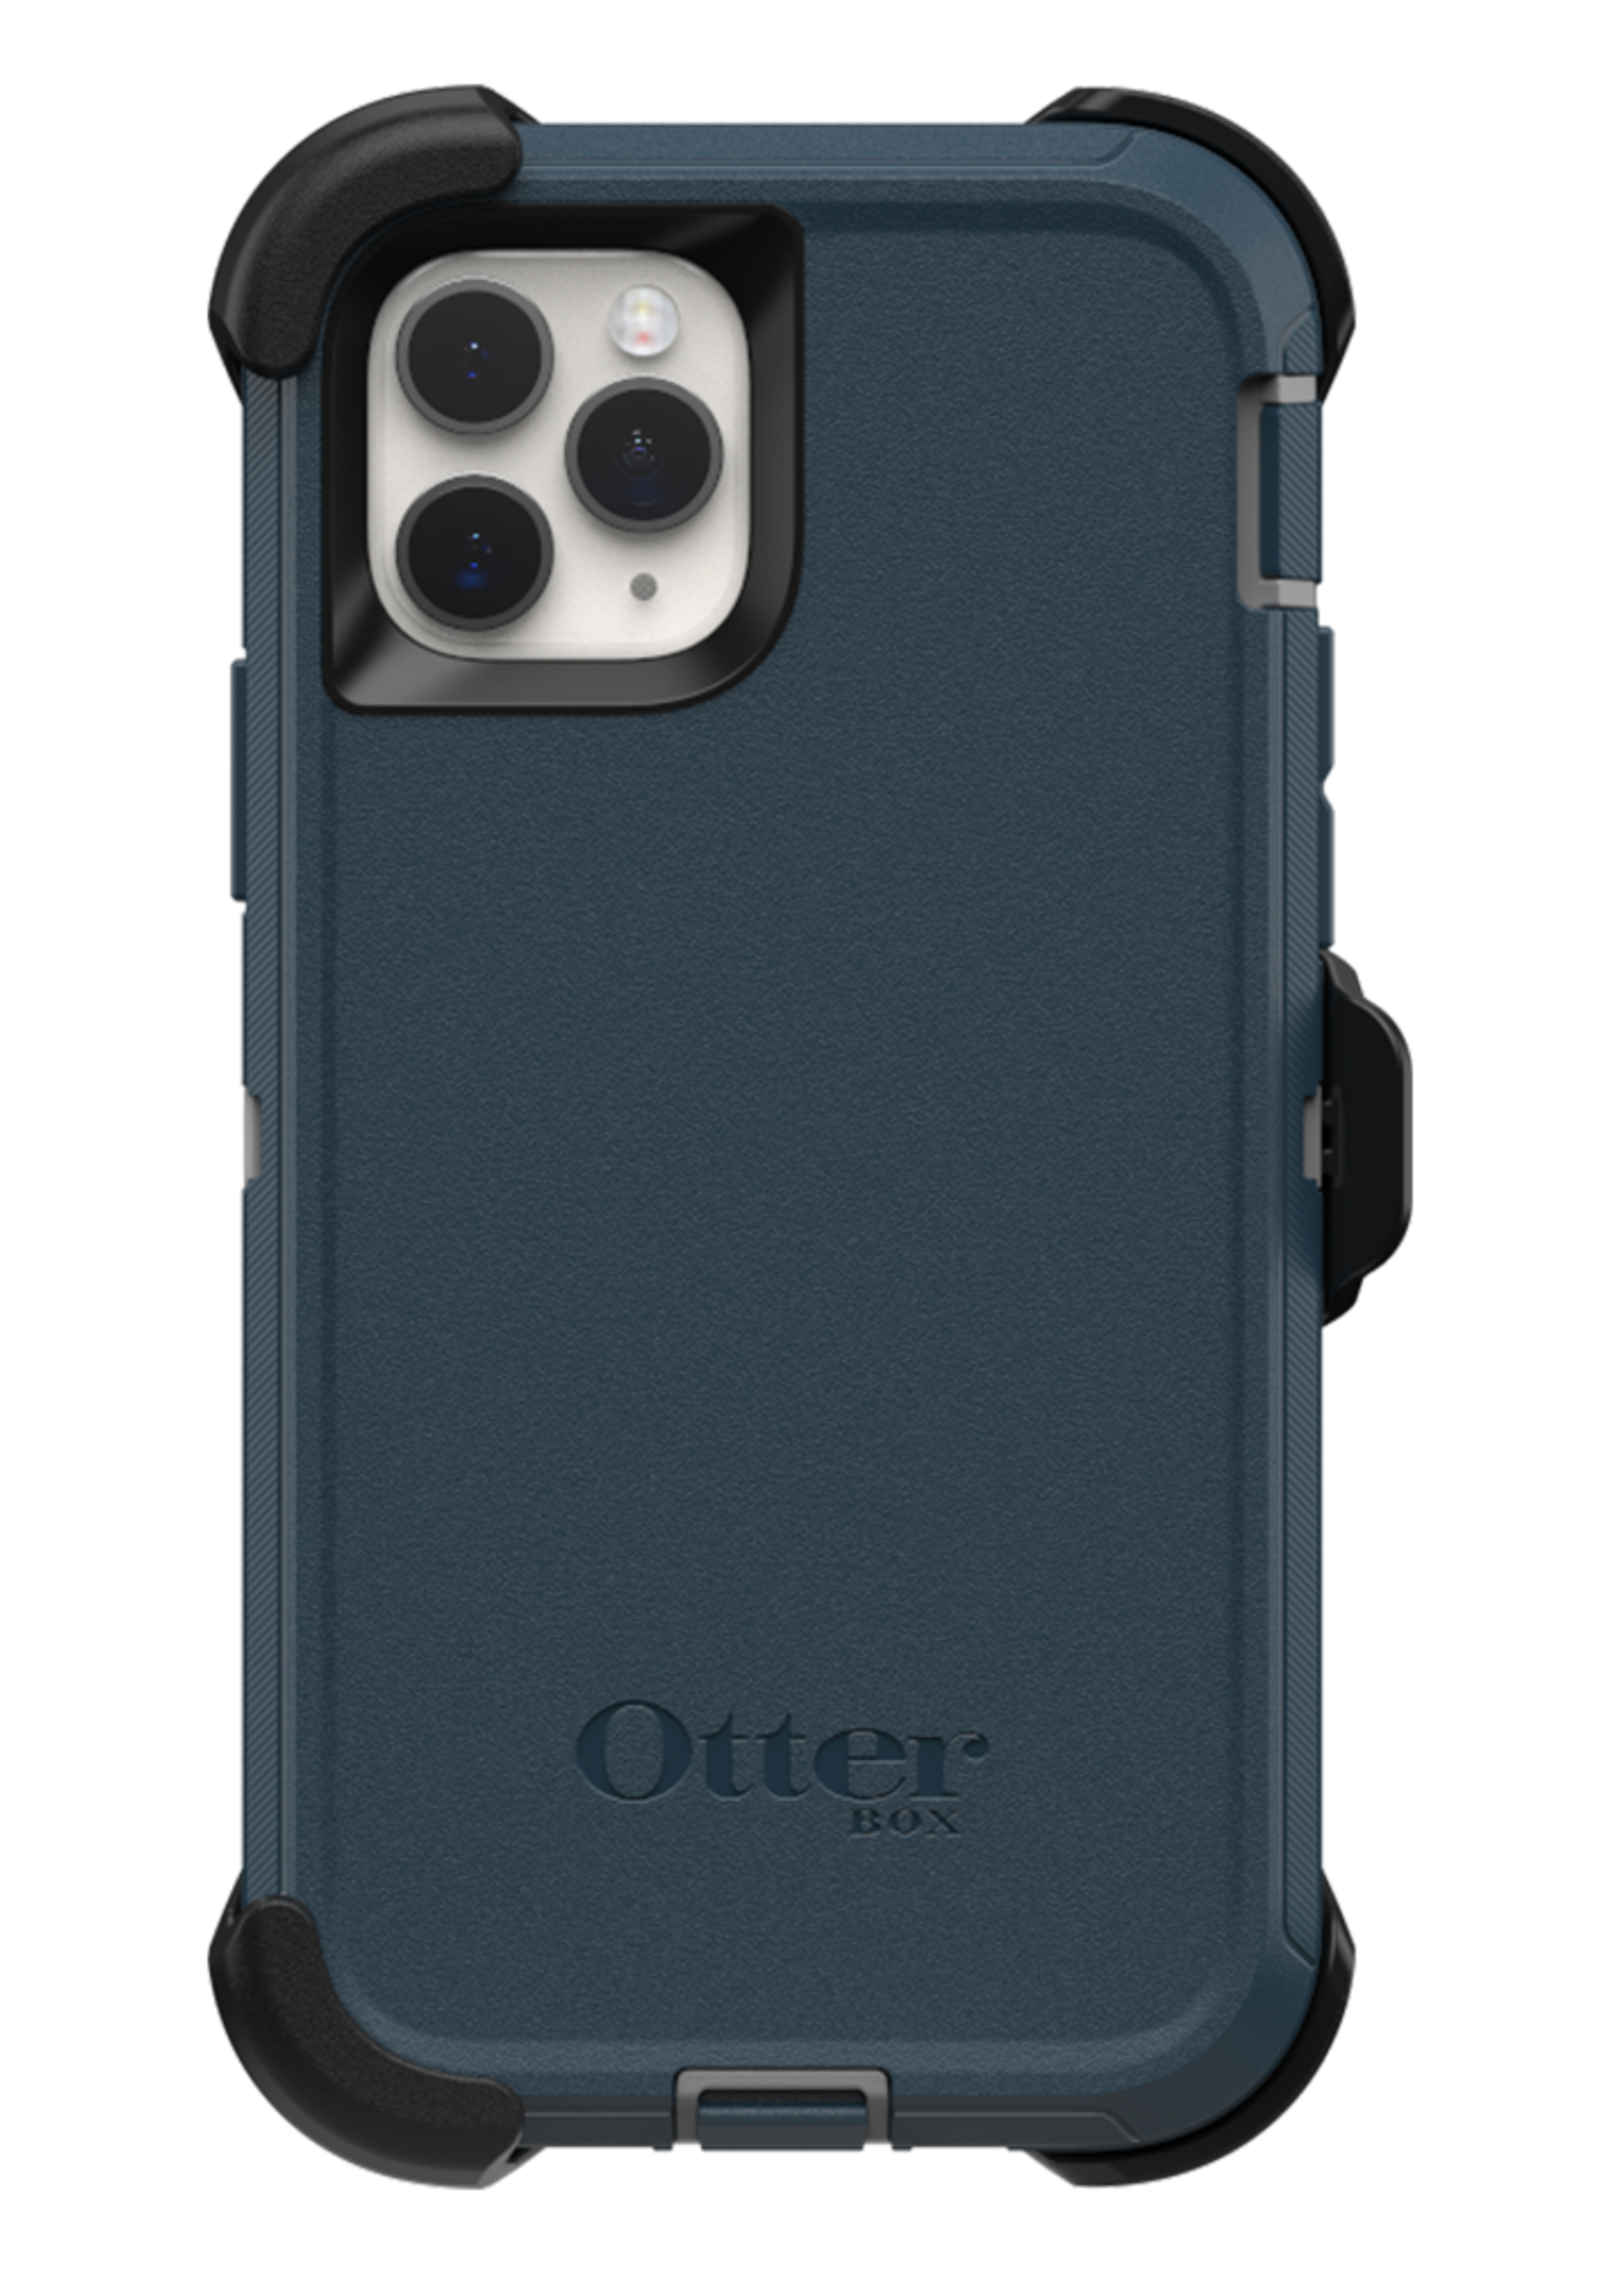 Otterbox OtterBox - Defender Case for Apple iPhone 11 Pro - Gone Fishin